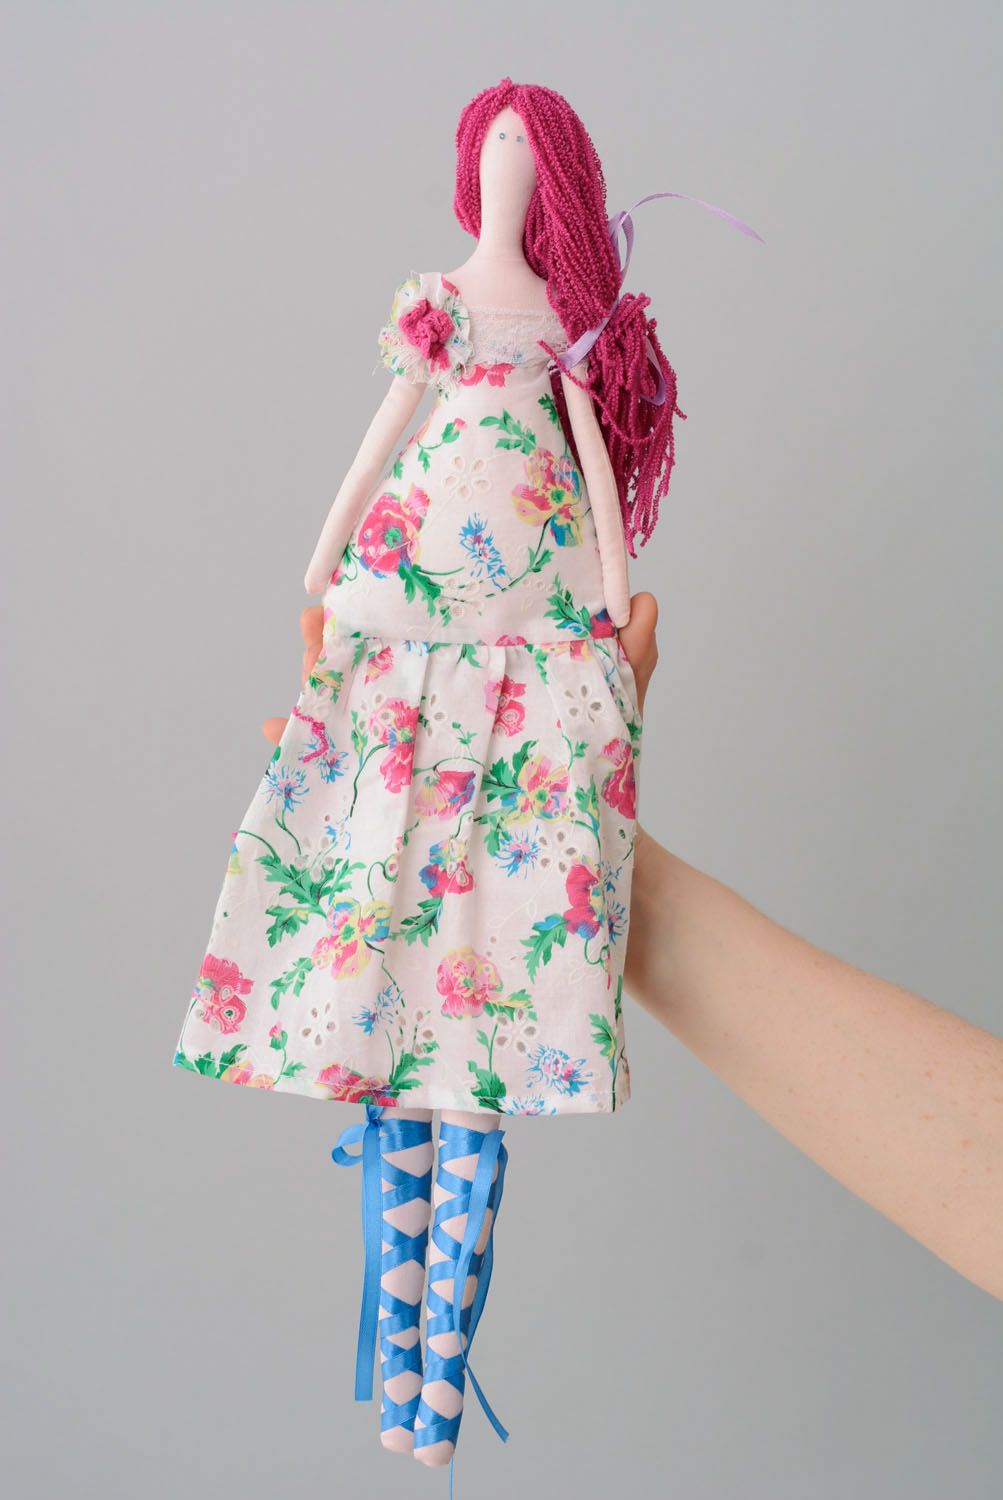 Designer doll with long legs photo 3